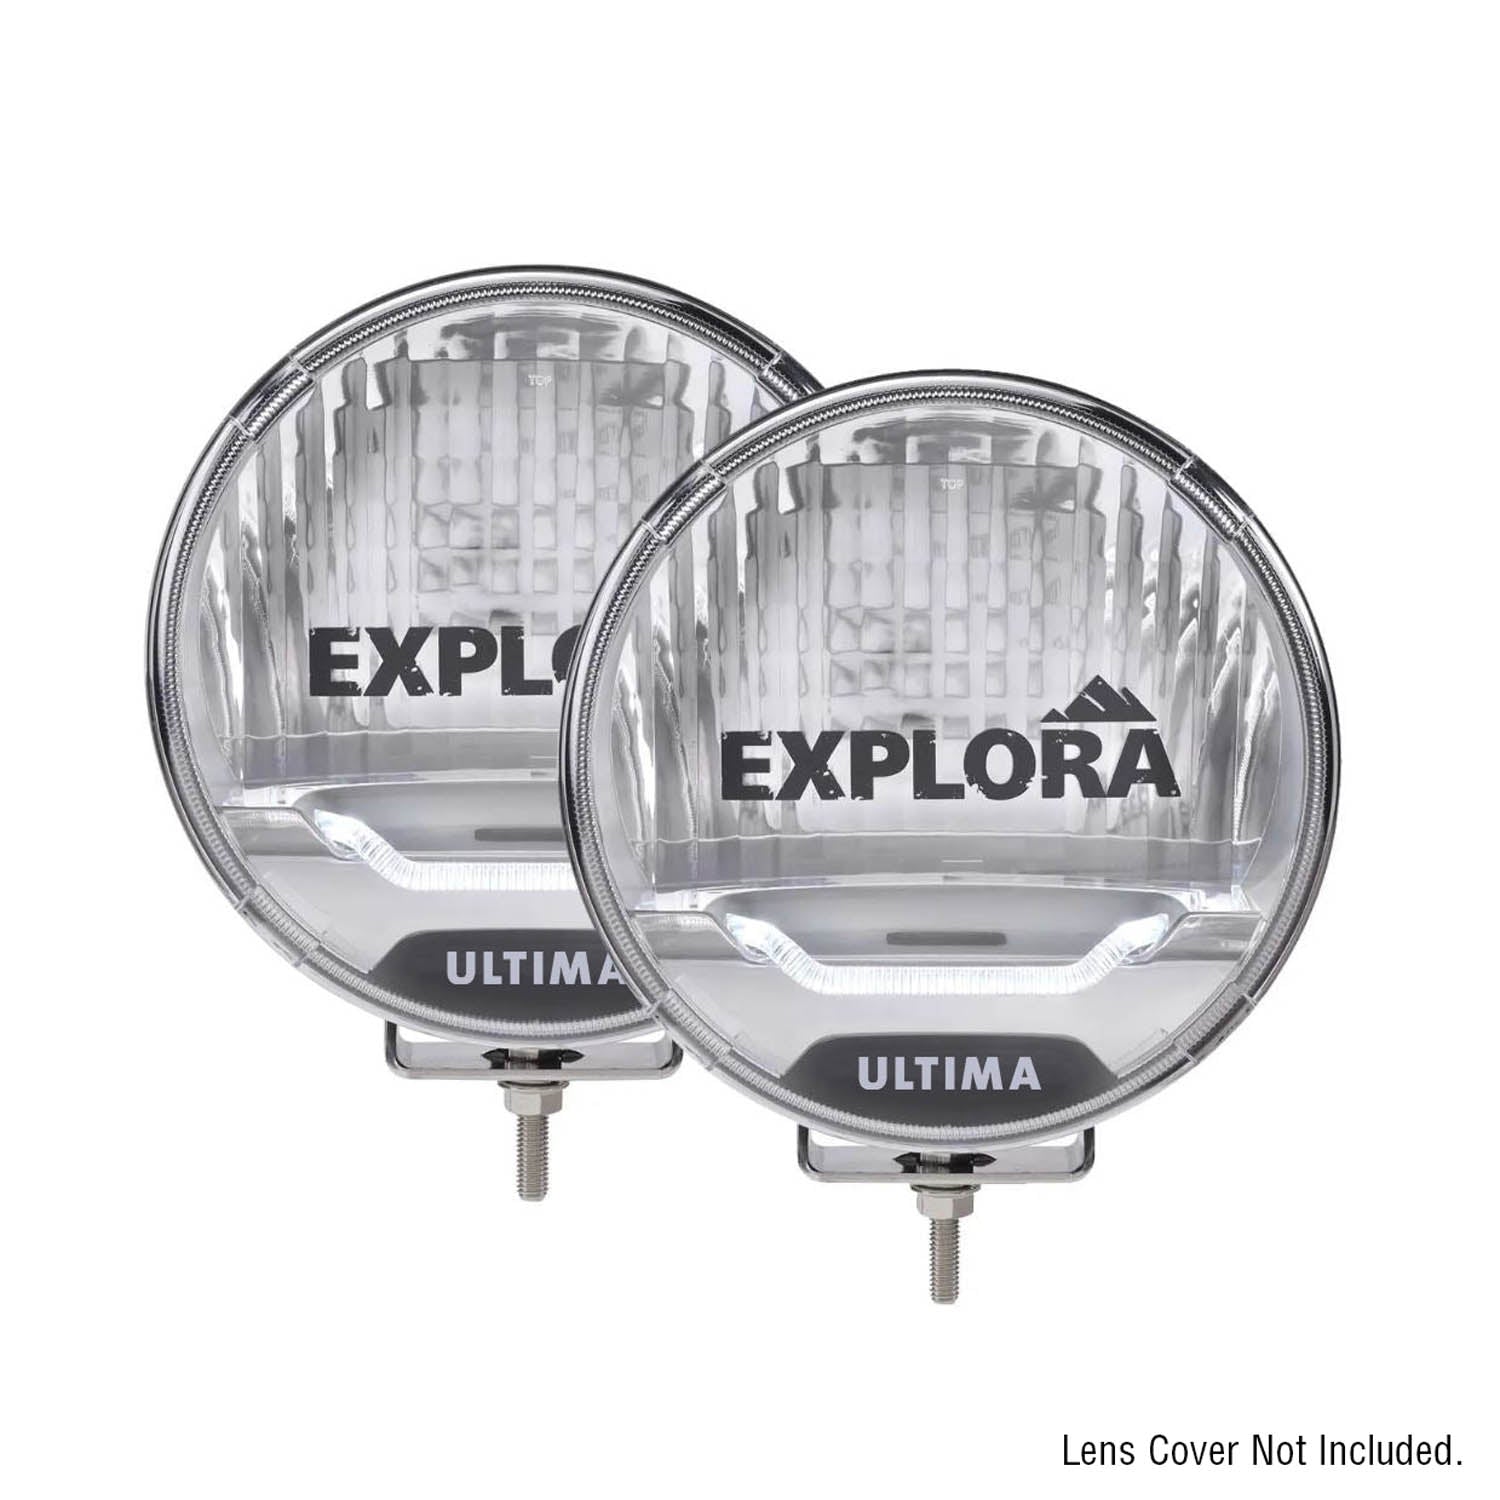 Explora 175 Driving Lamps, 12V - Twin Pack